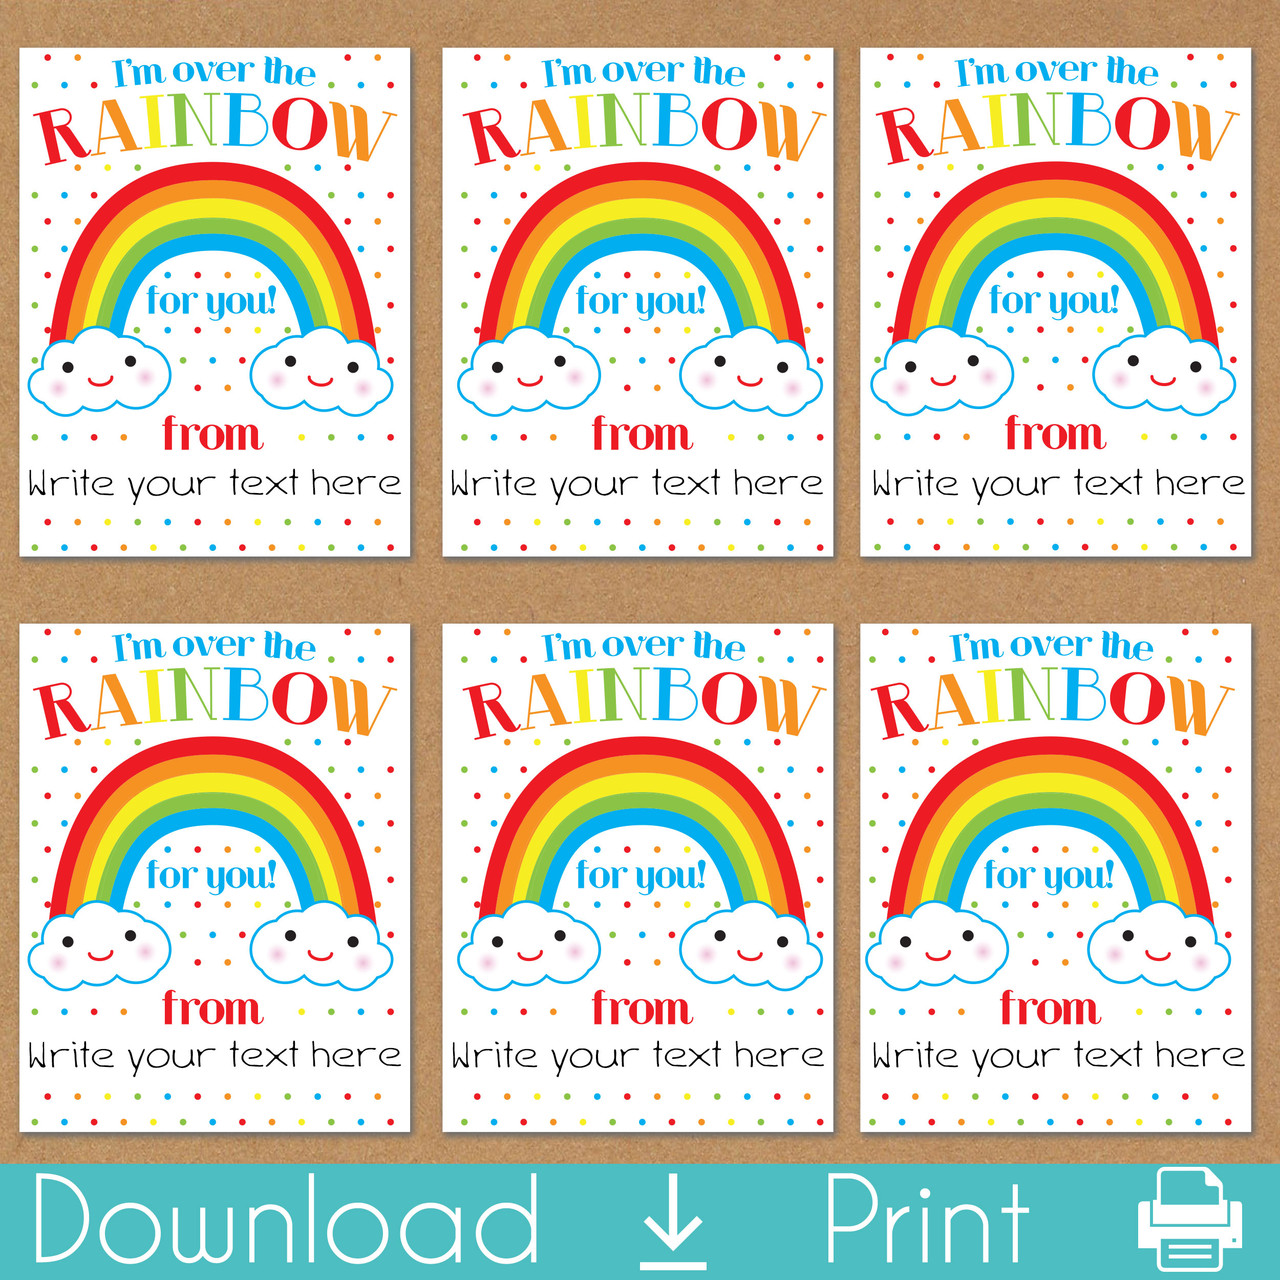 https://cdn11.bigcommerce.com/s-5grzuu6/images/stencil/1280x1280/products/4404/45025/Happy-Rainbow-Printable_Valentines_Day_Cards_for_Kids__69674.1641248814.jpg?c=2